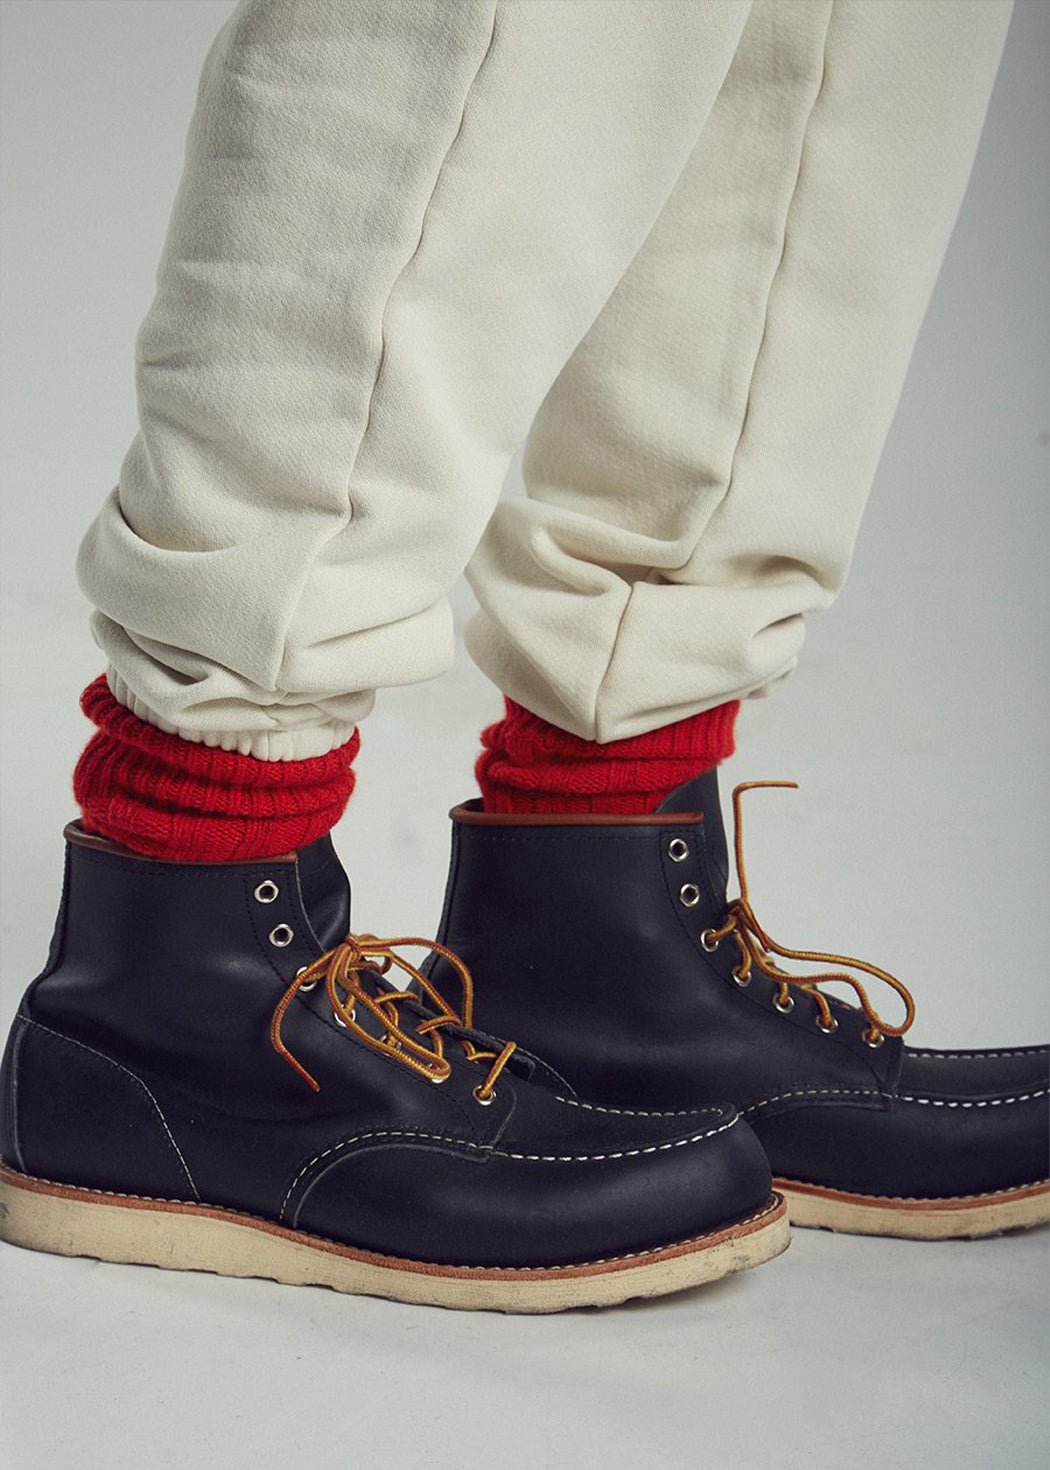 Red Cashmere Socks from Les Tien being worn with boots and sweats. Unisex sizing.